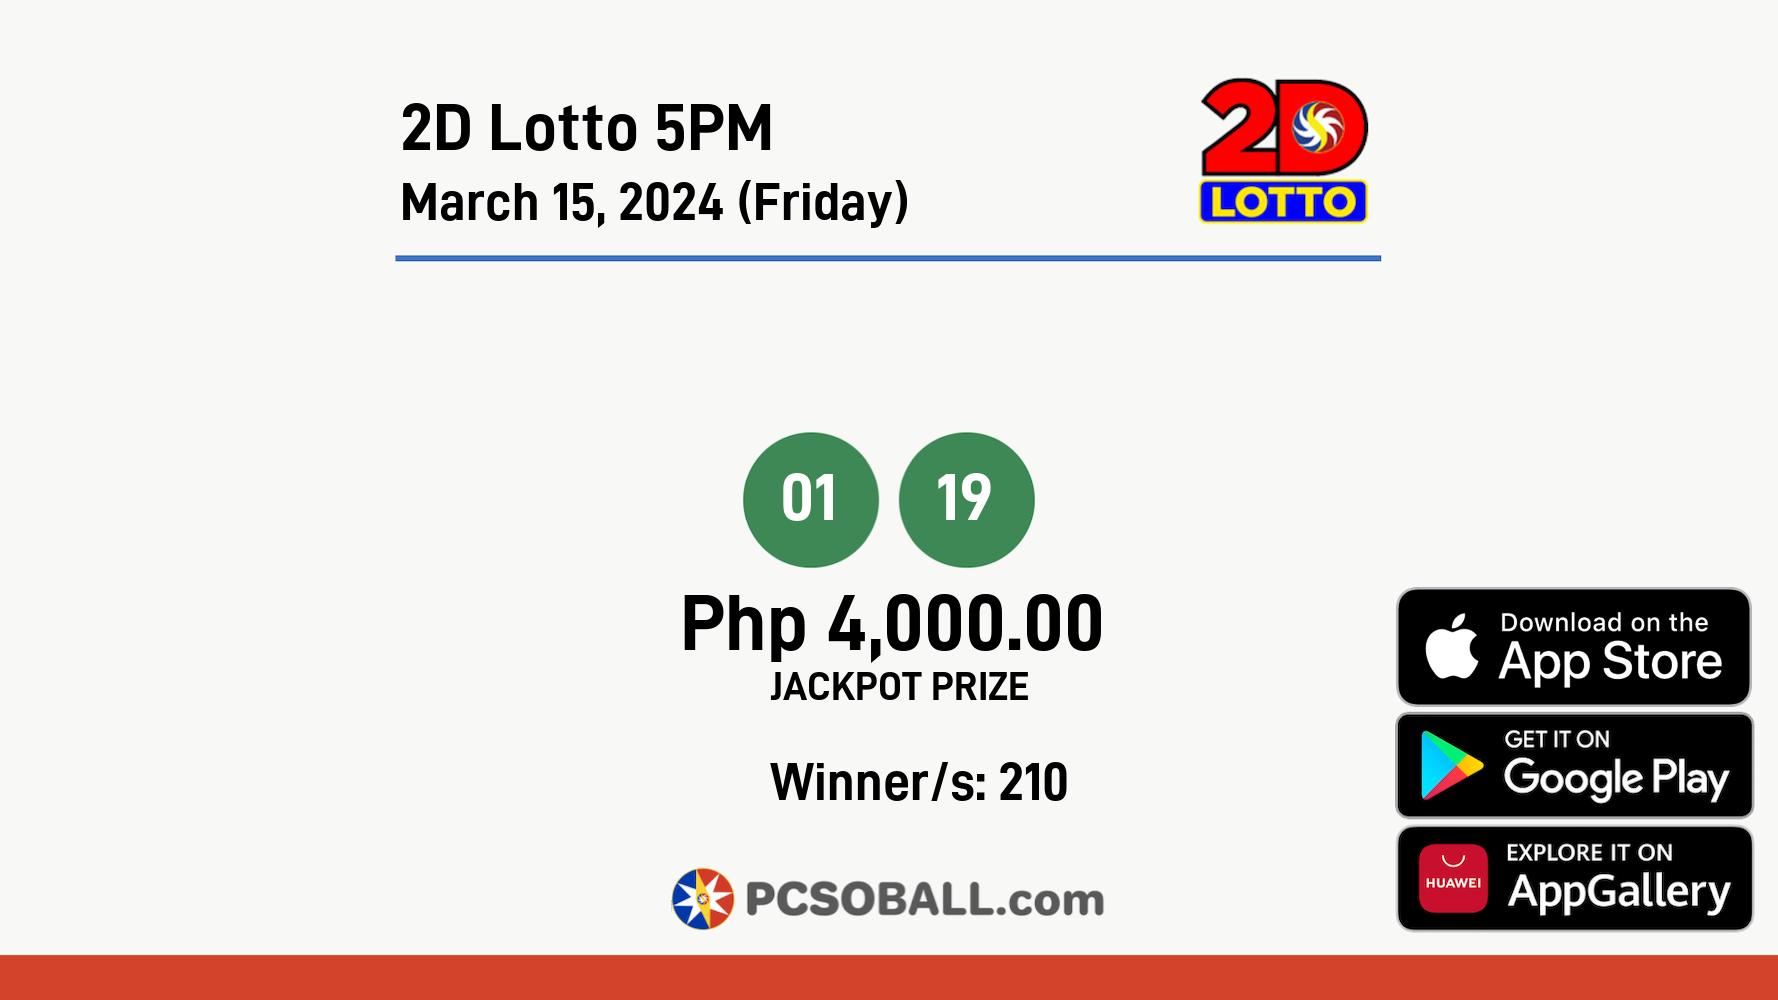 2D Lotto 5PM March 15, 2024 (Friday) Result